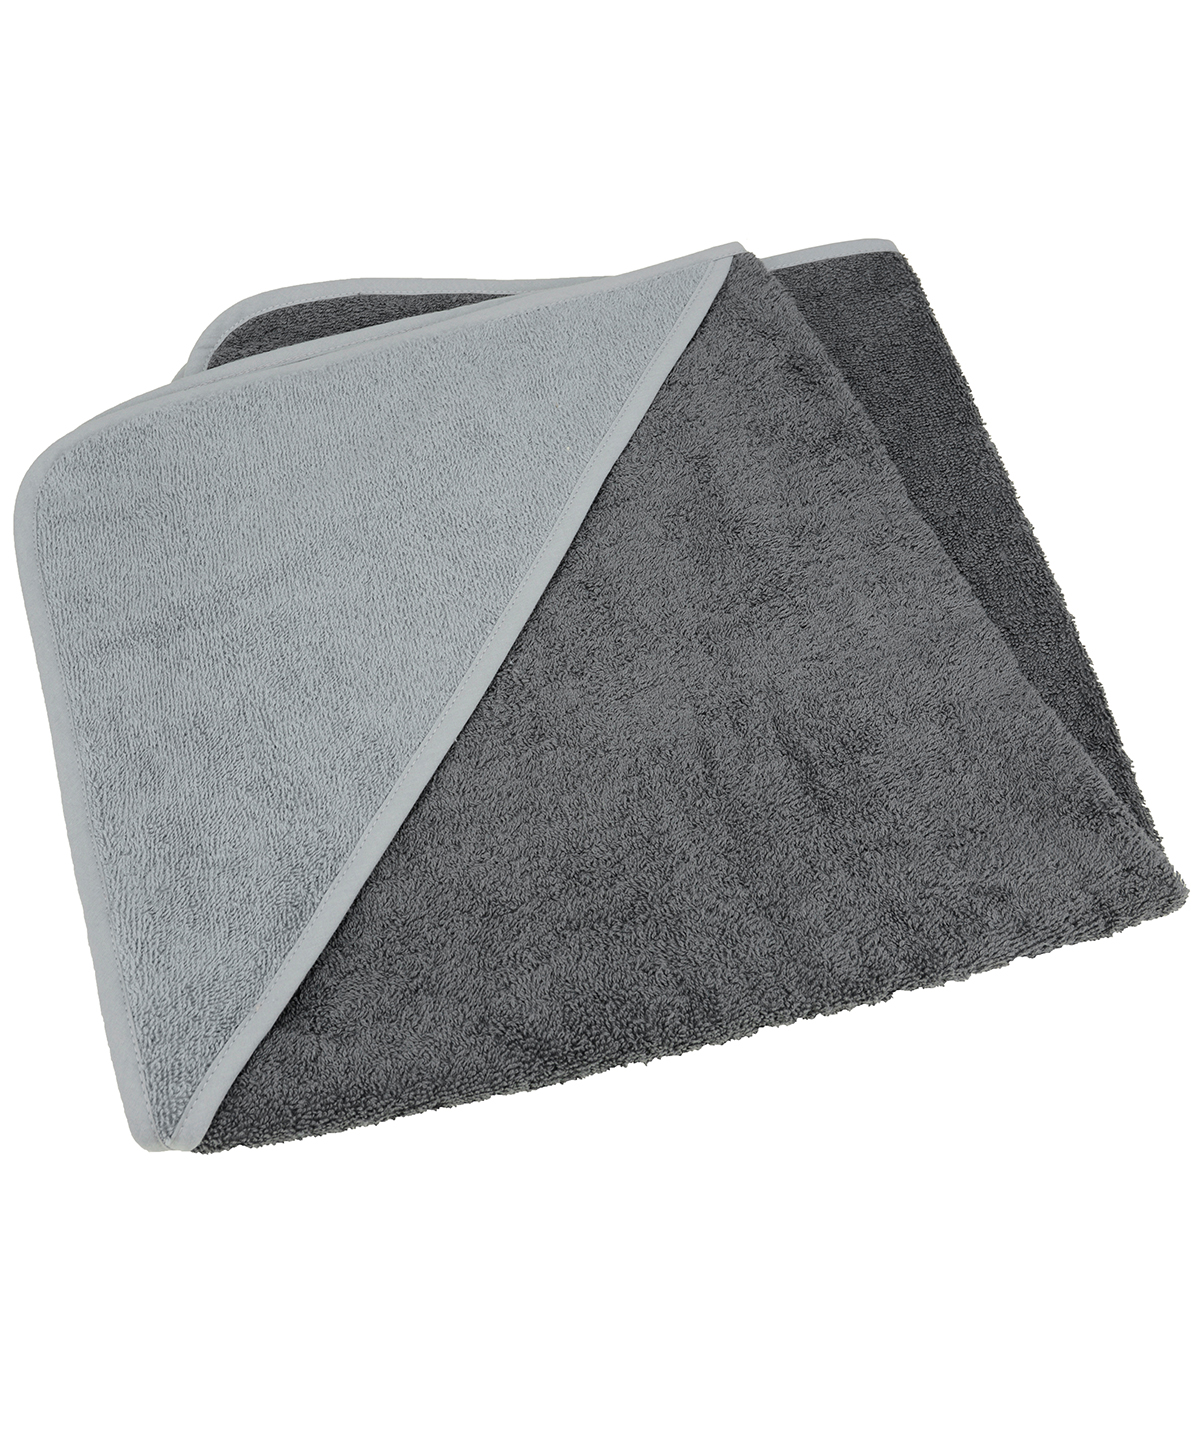 Babiezz® Medium Baby Hooded Towel Graphite/Anthracite Grey/Anthracite Grey Size One Size